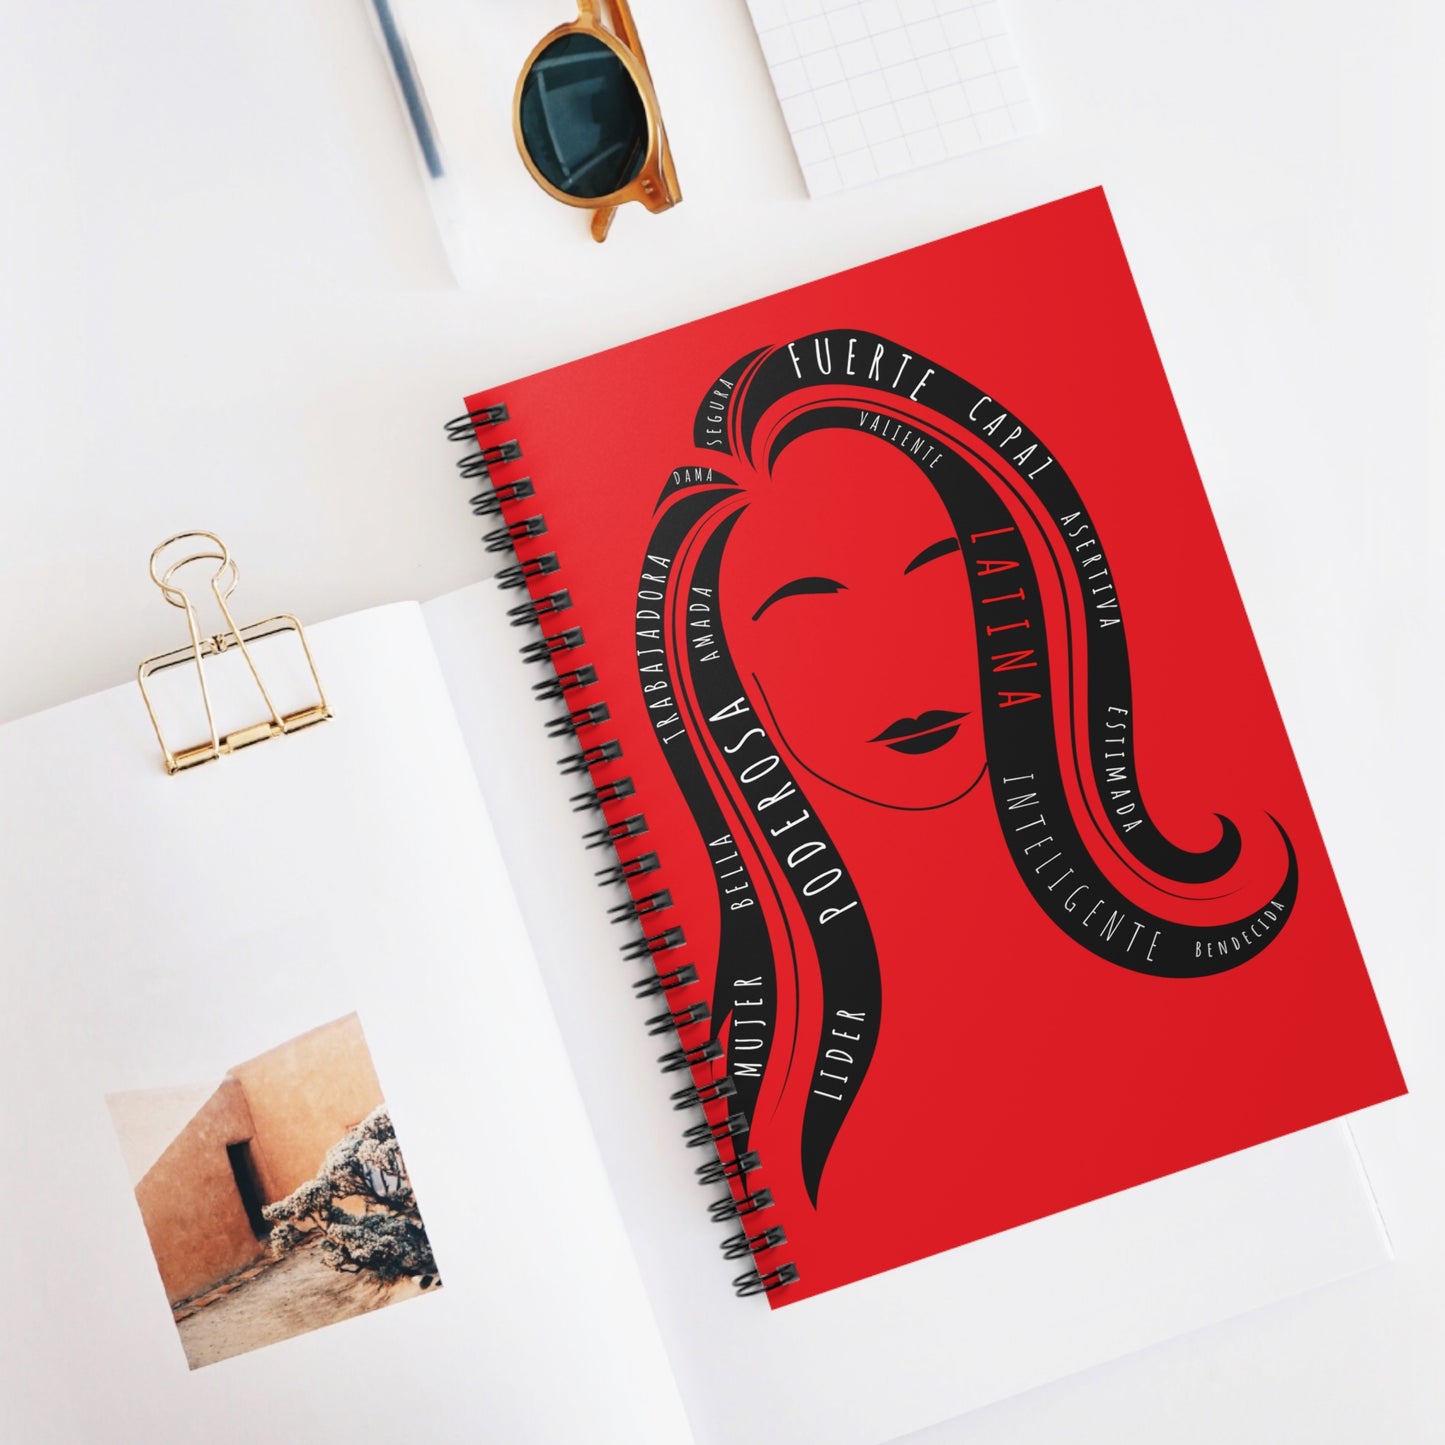 Fuerza Latina Red Spiral Notebook - Ruled Line